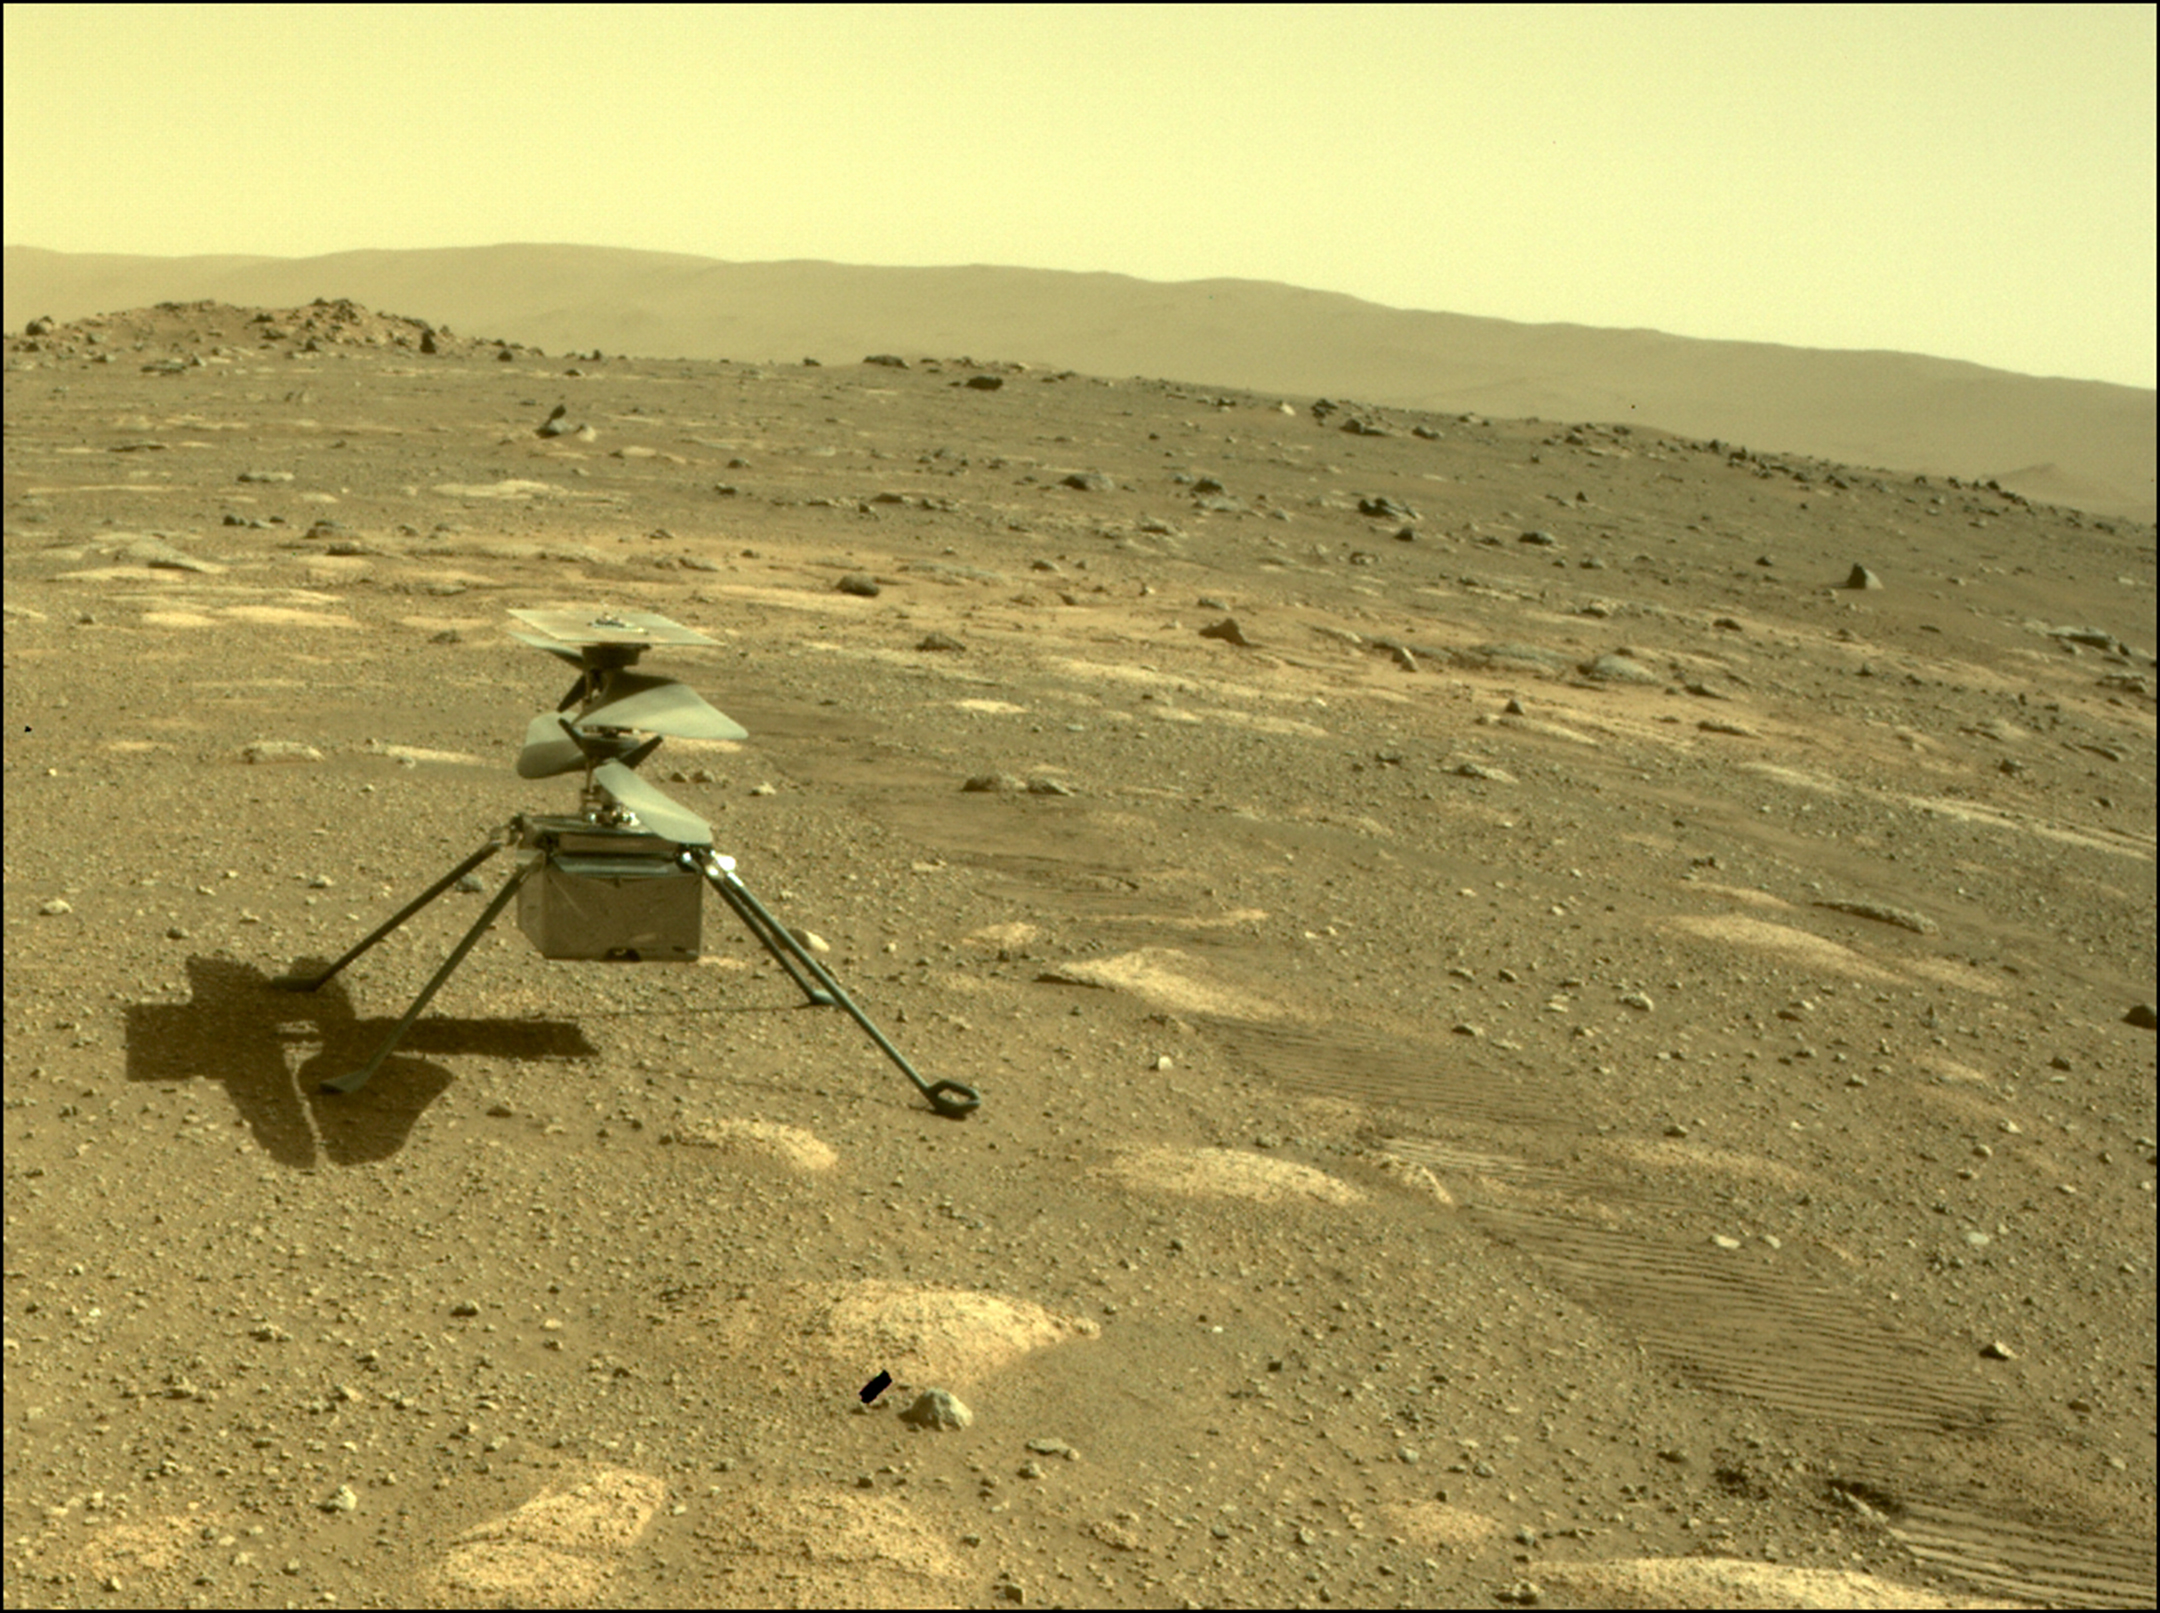 Photo of a small helicopter parked on the Martian surface